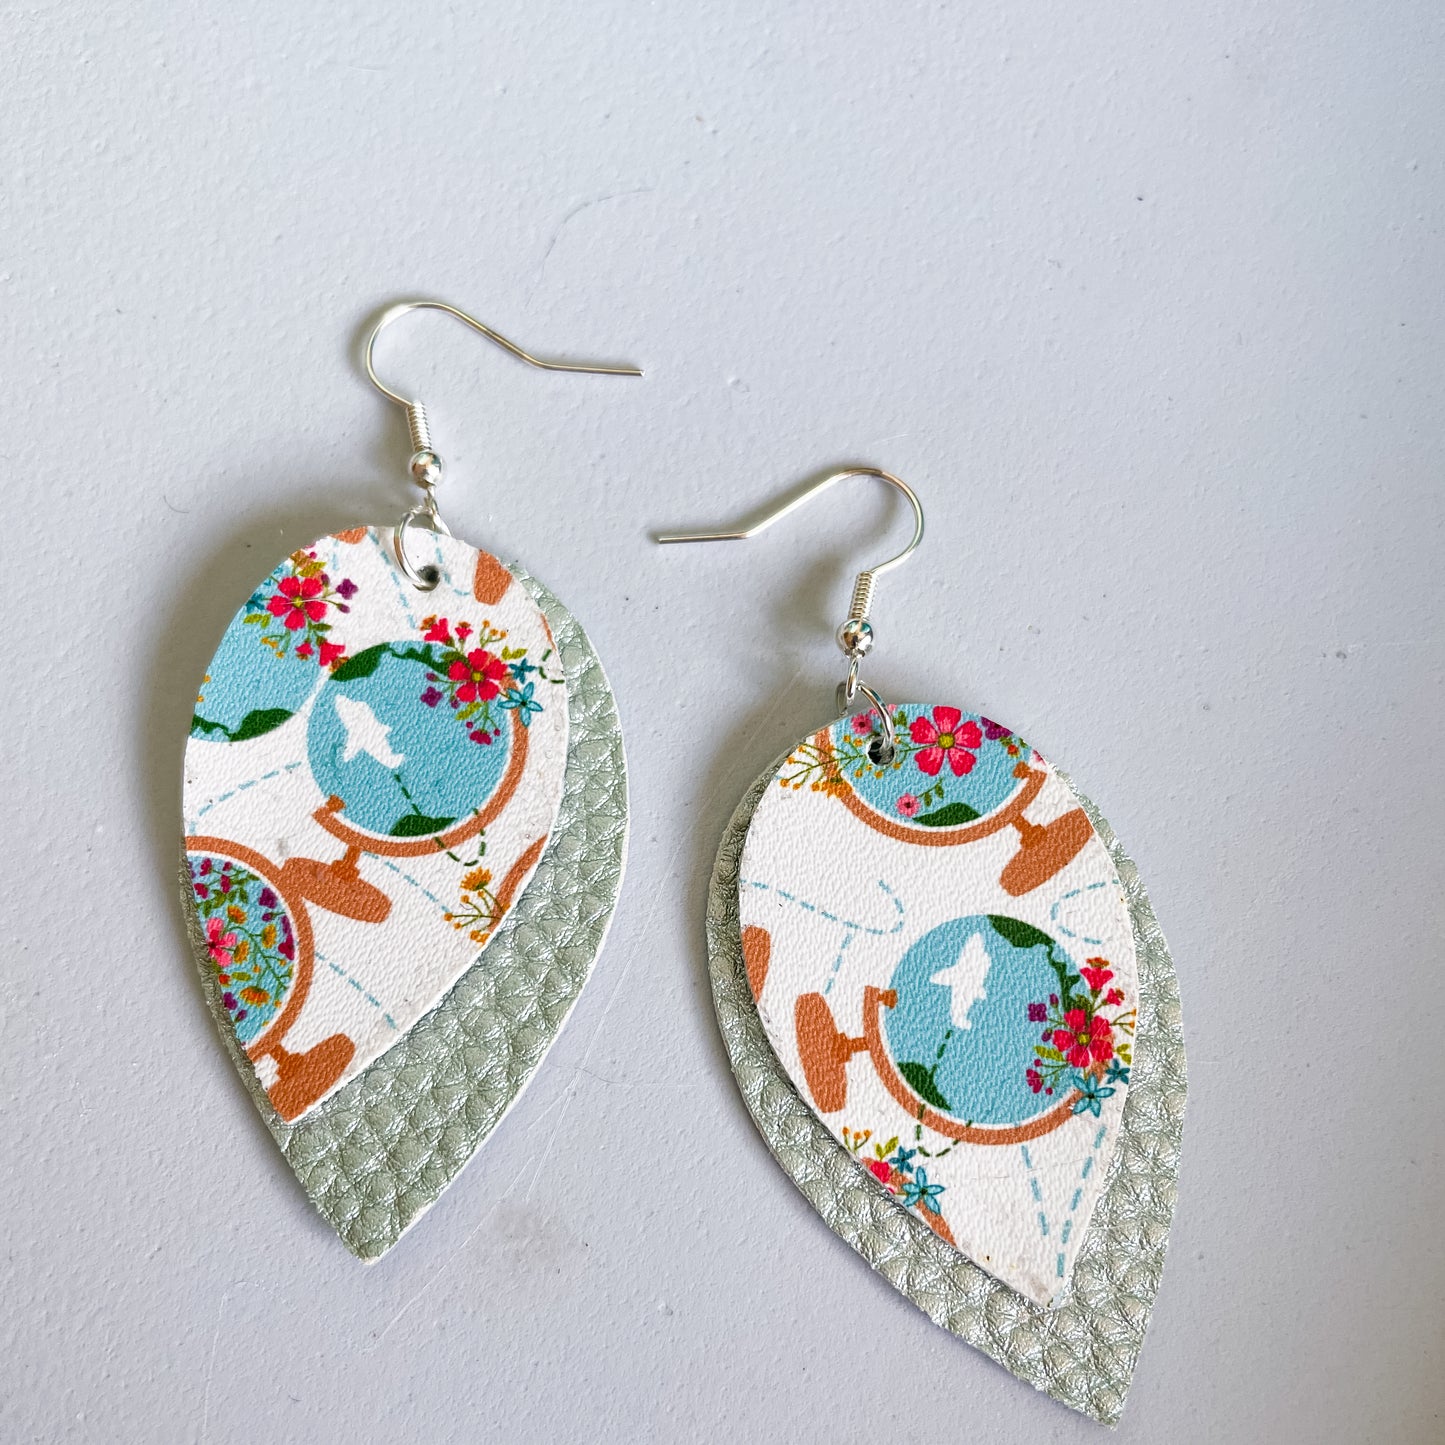 Travel the Globe Marie Style 2 Layer Dangle Earrings | Marie Style Dangle Earrings | Layered Teardrop Shape | Teal Floral Globes